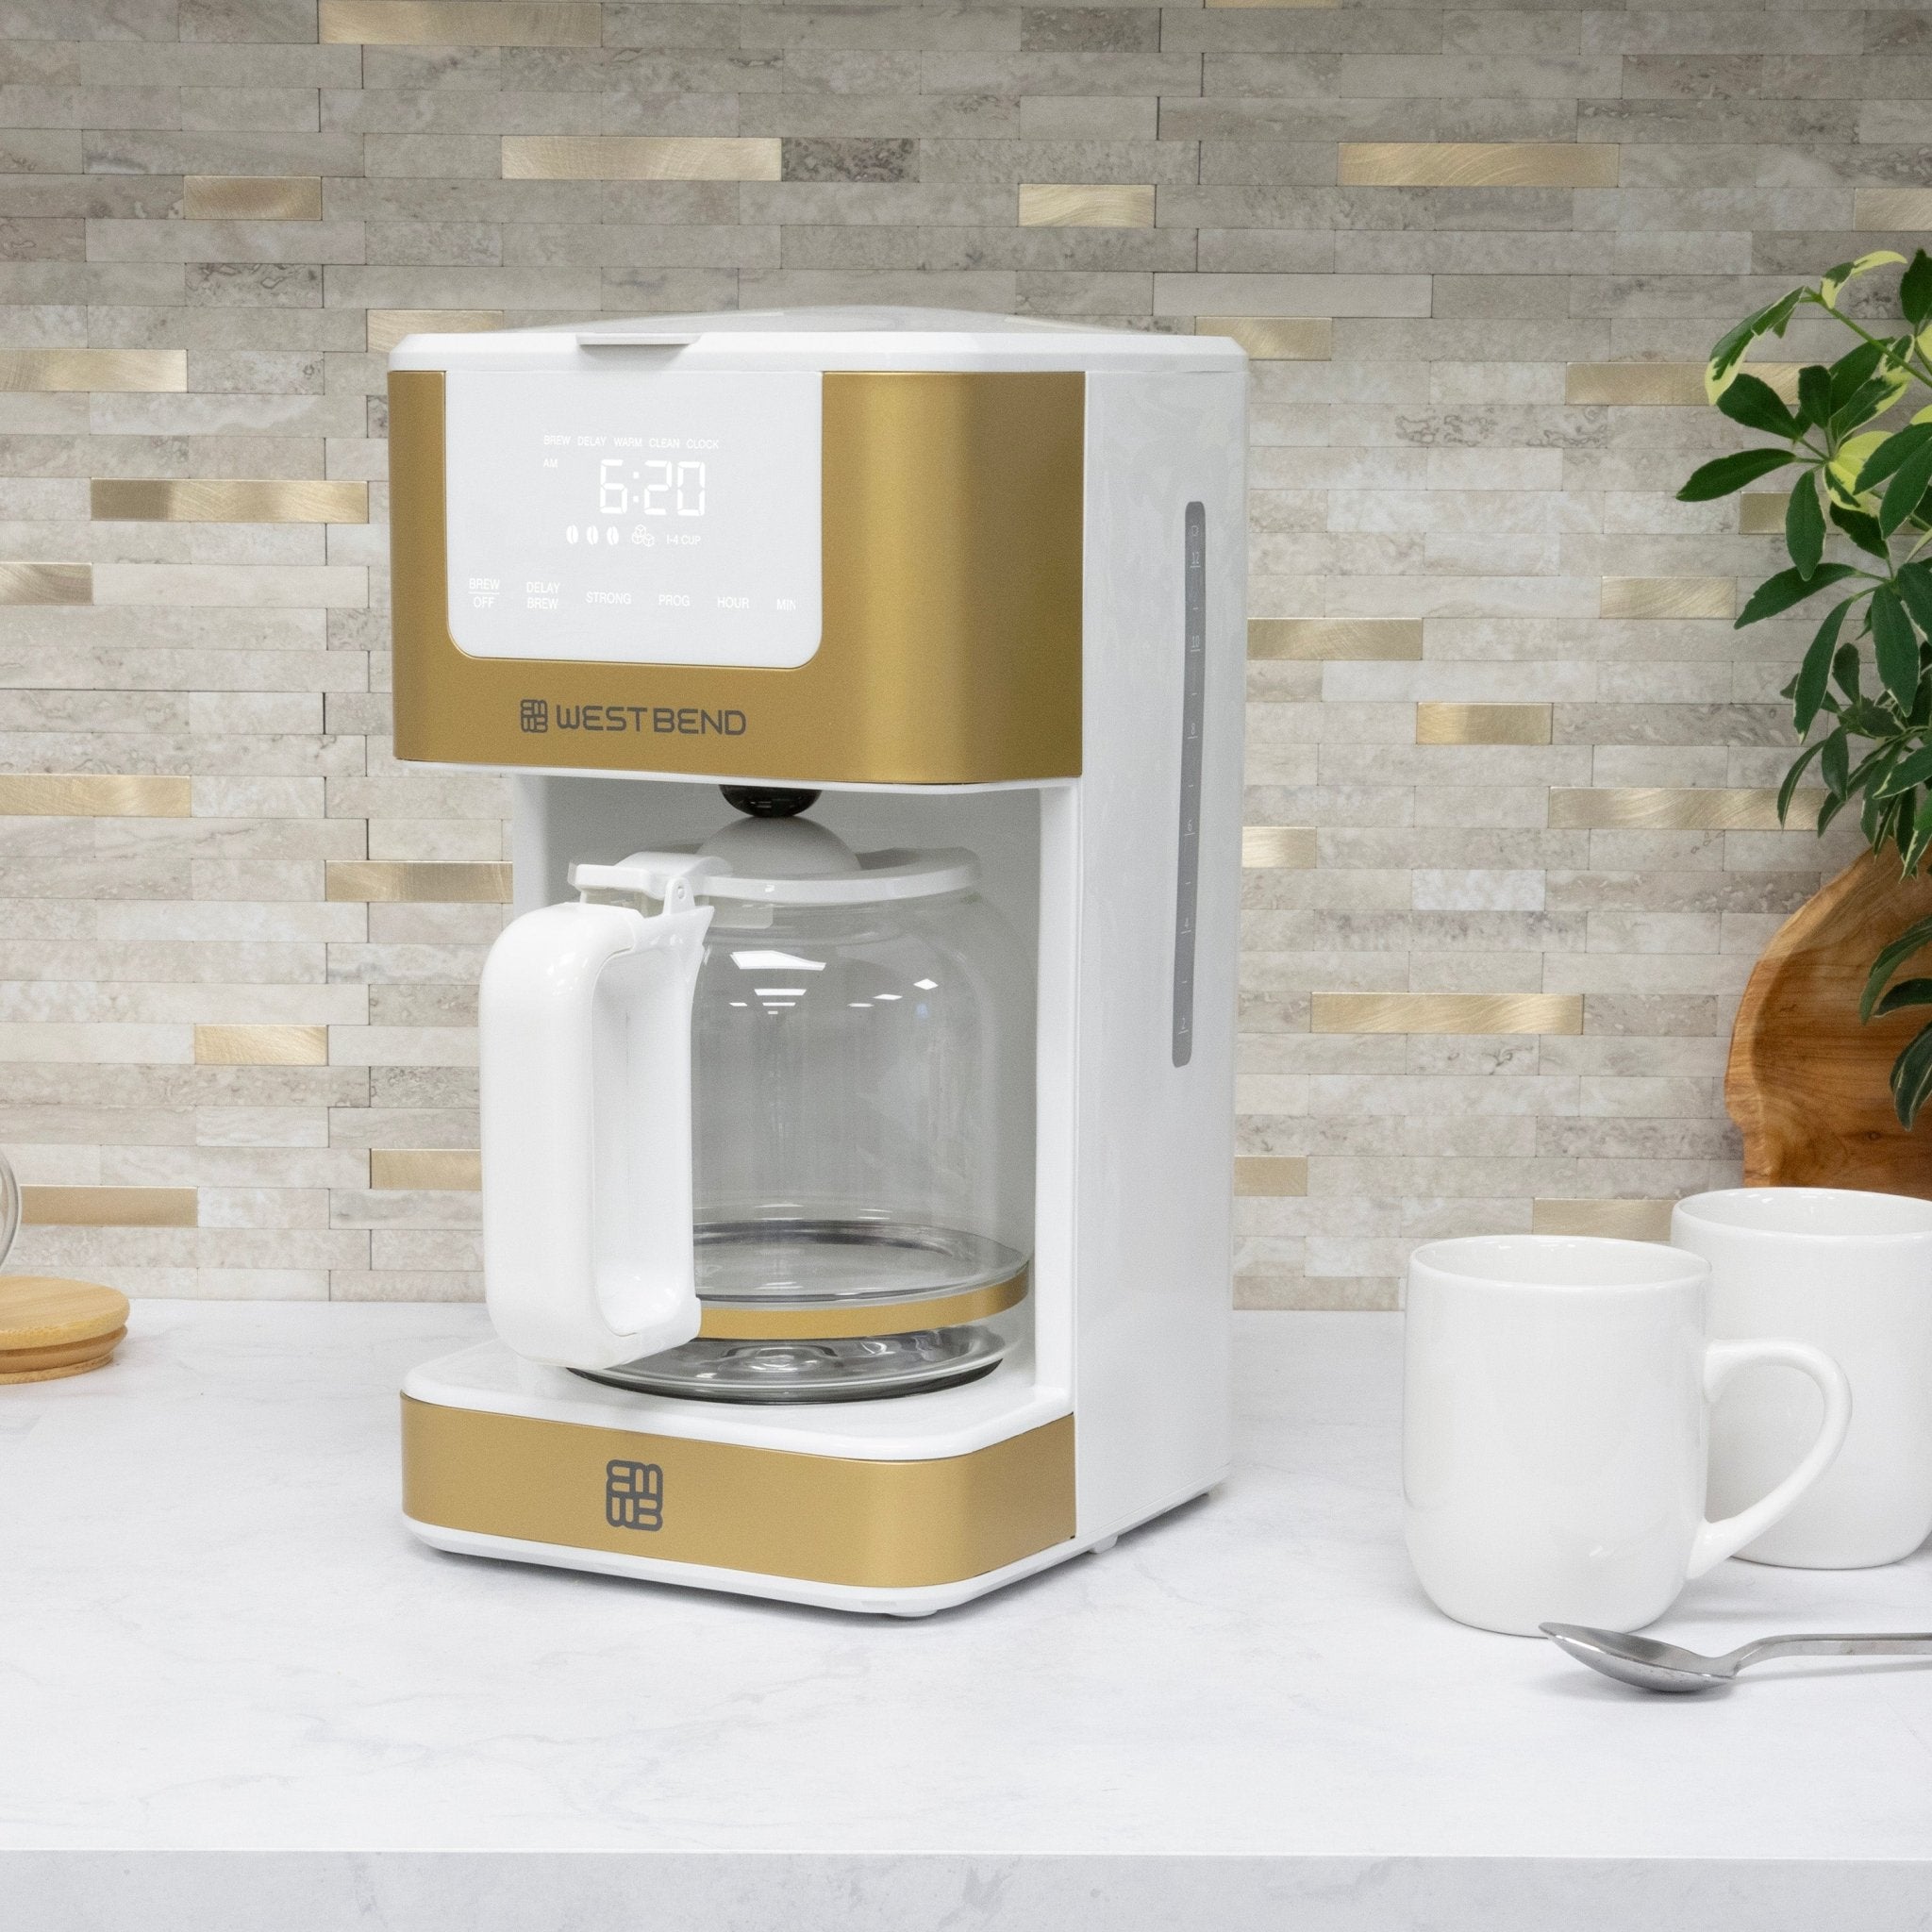 12-Cup Coffee Maker